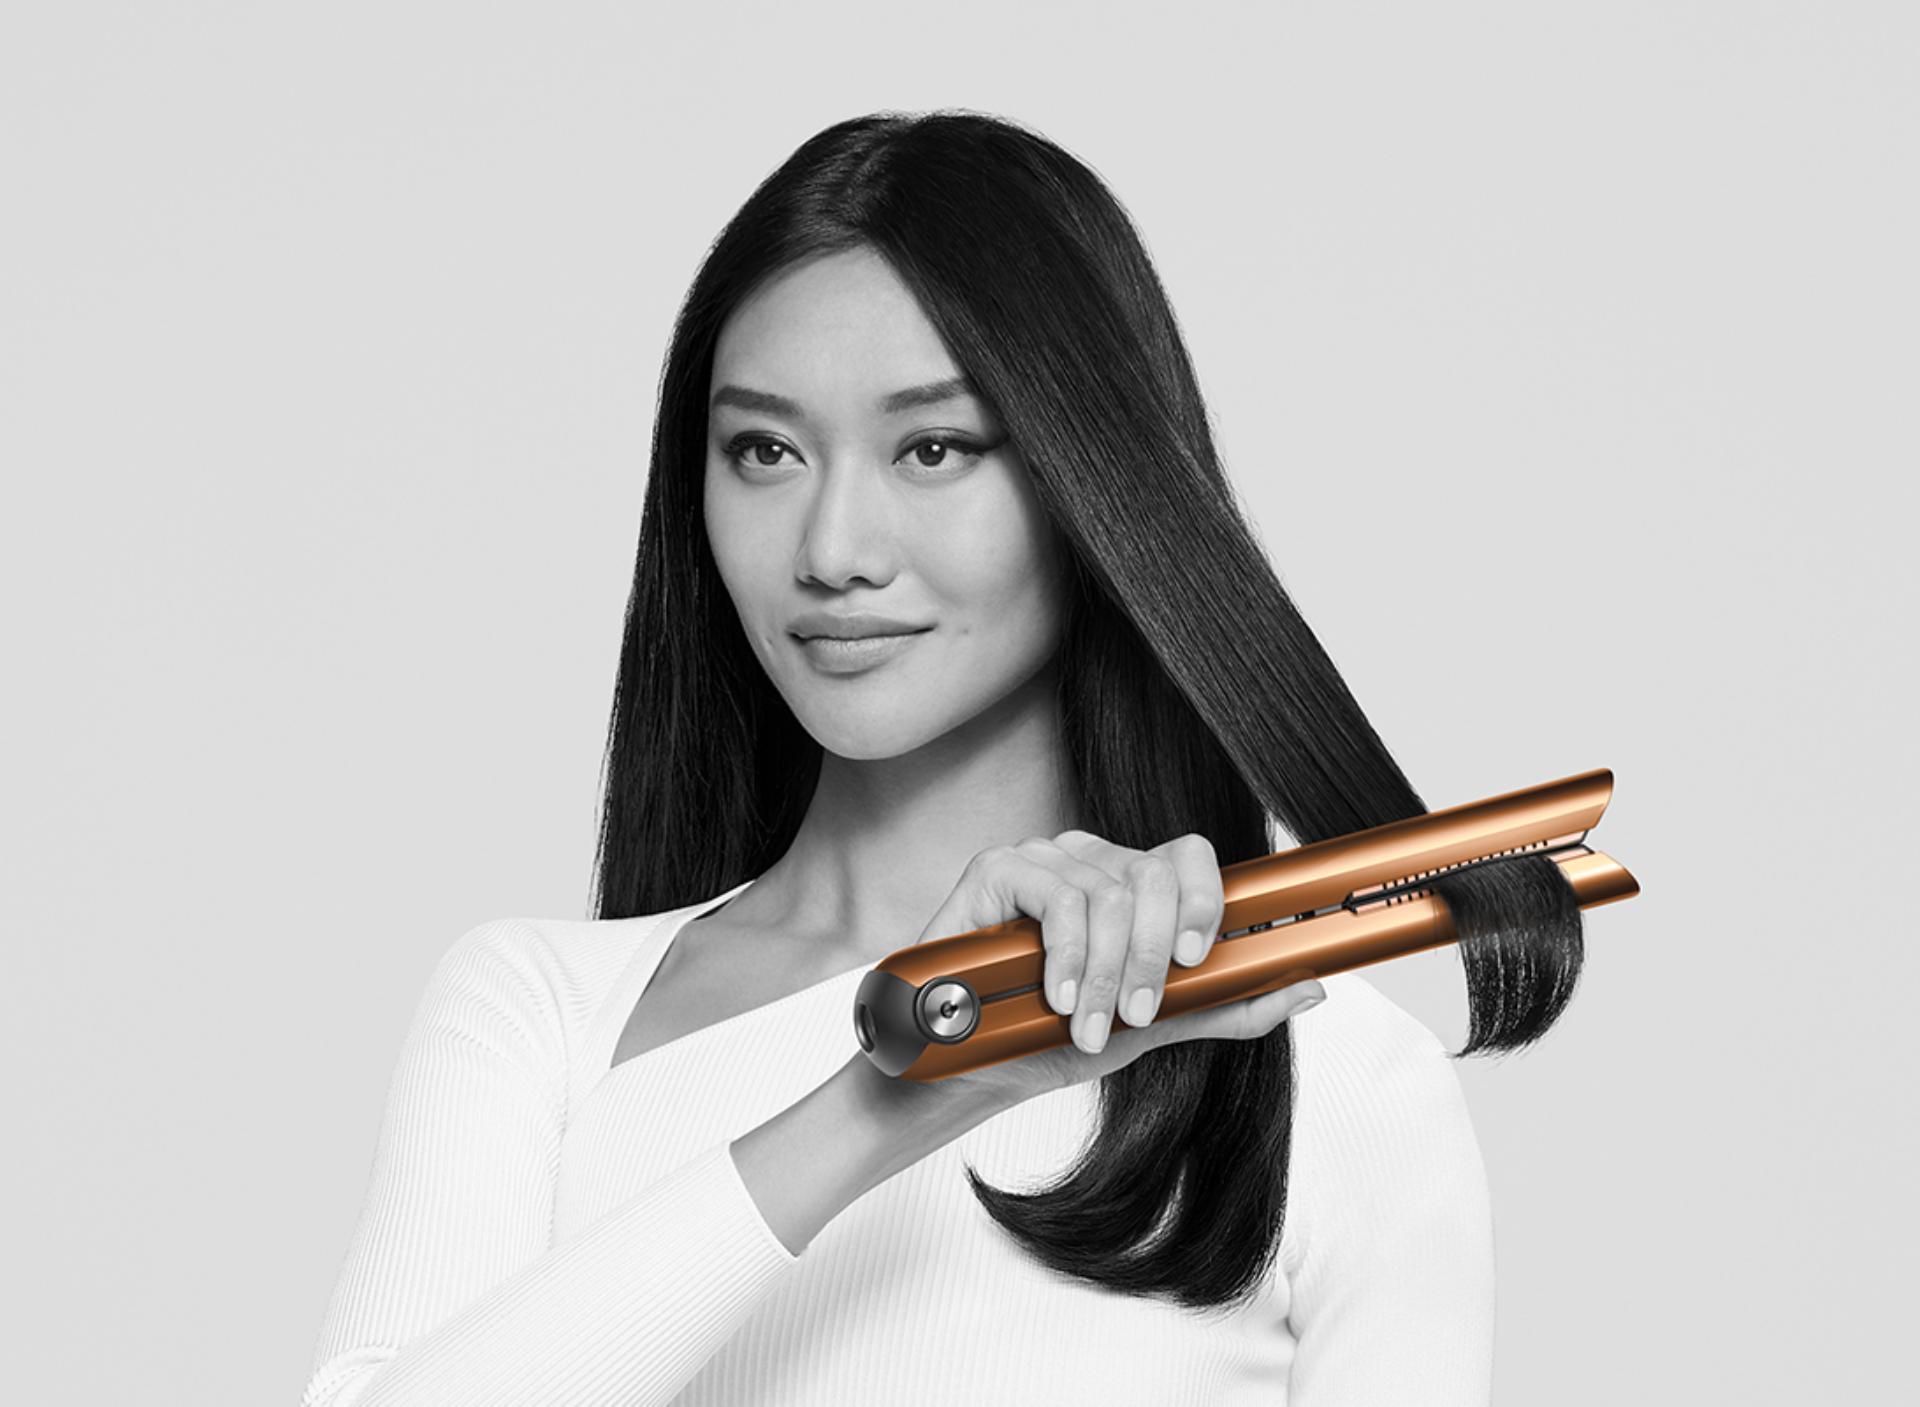 Dyson Hair Care Products & Styling Tools | Dyson Australia